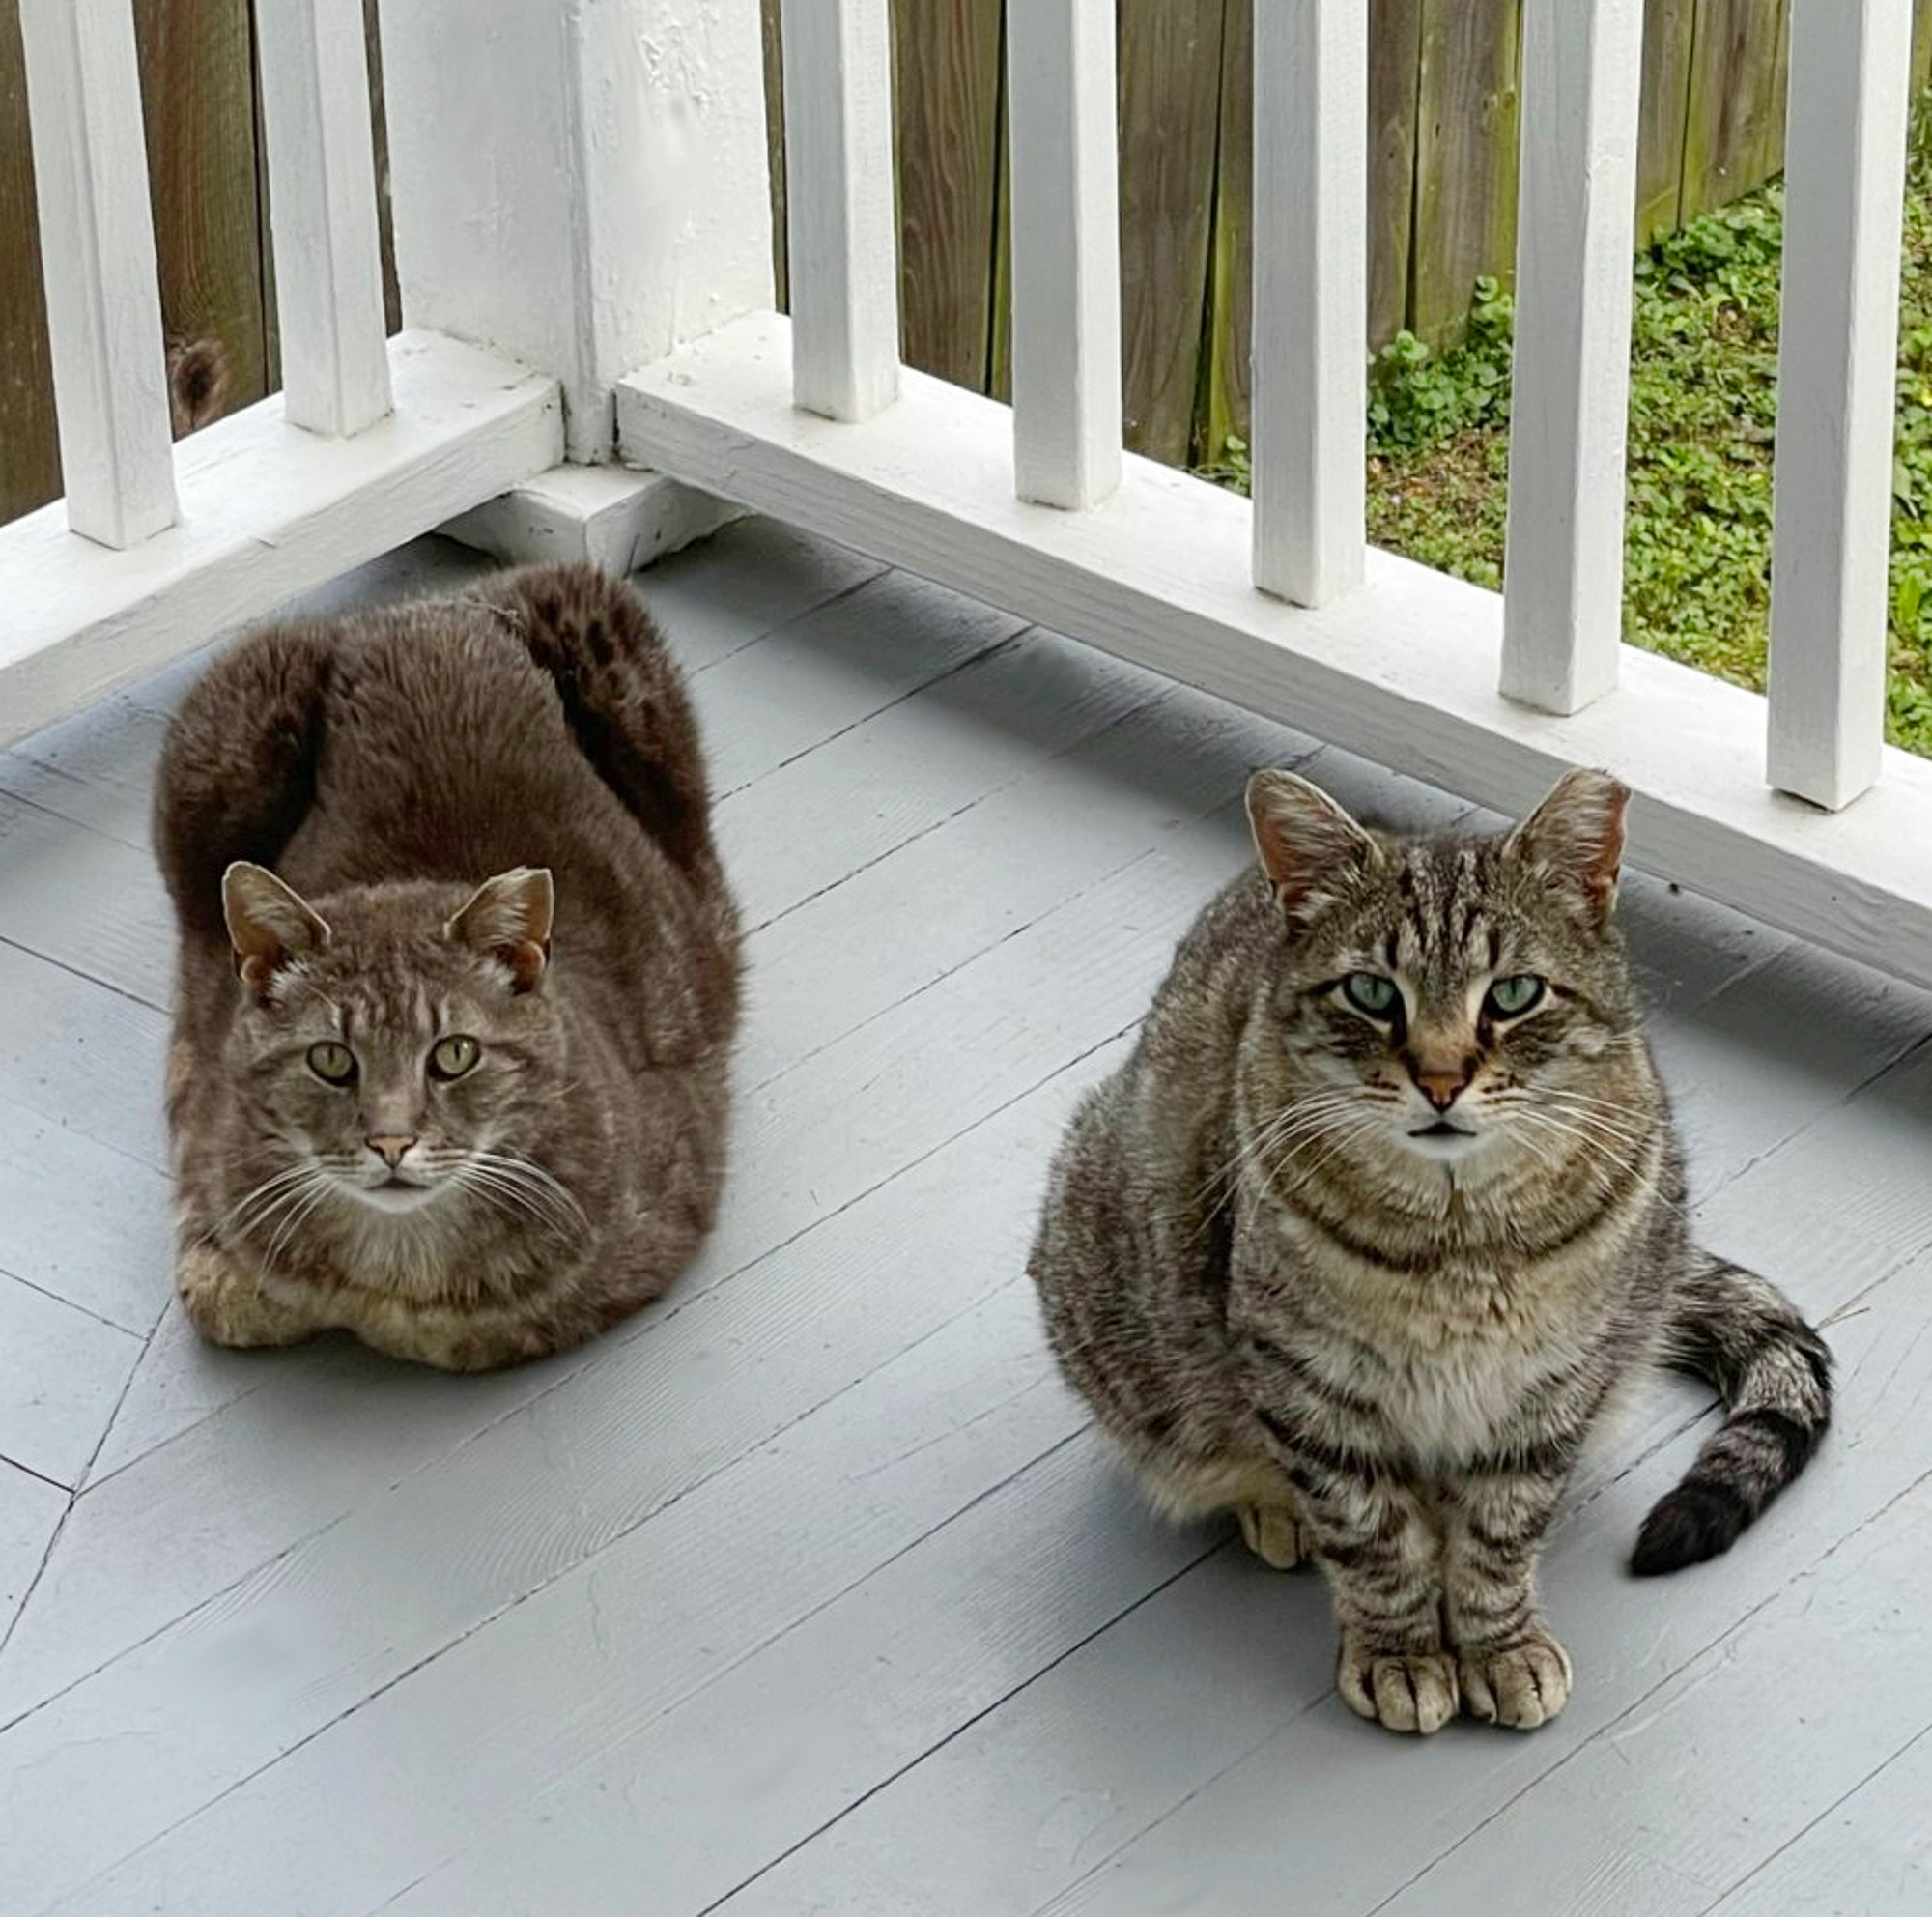 Two tabby cats, Ash and Taylor, wait patiently(?) on the back porch.